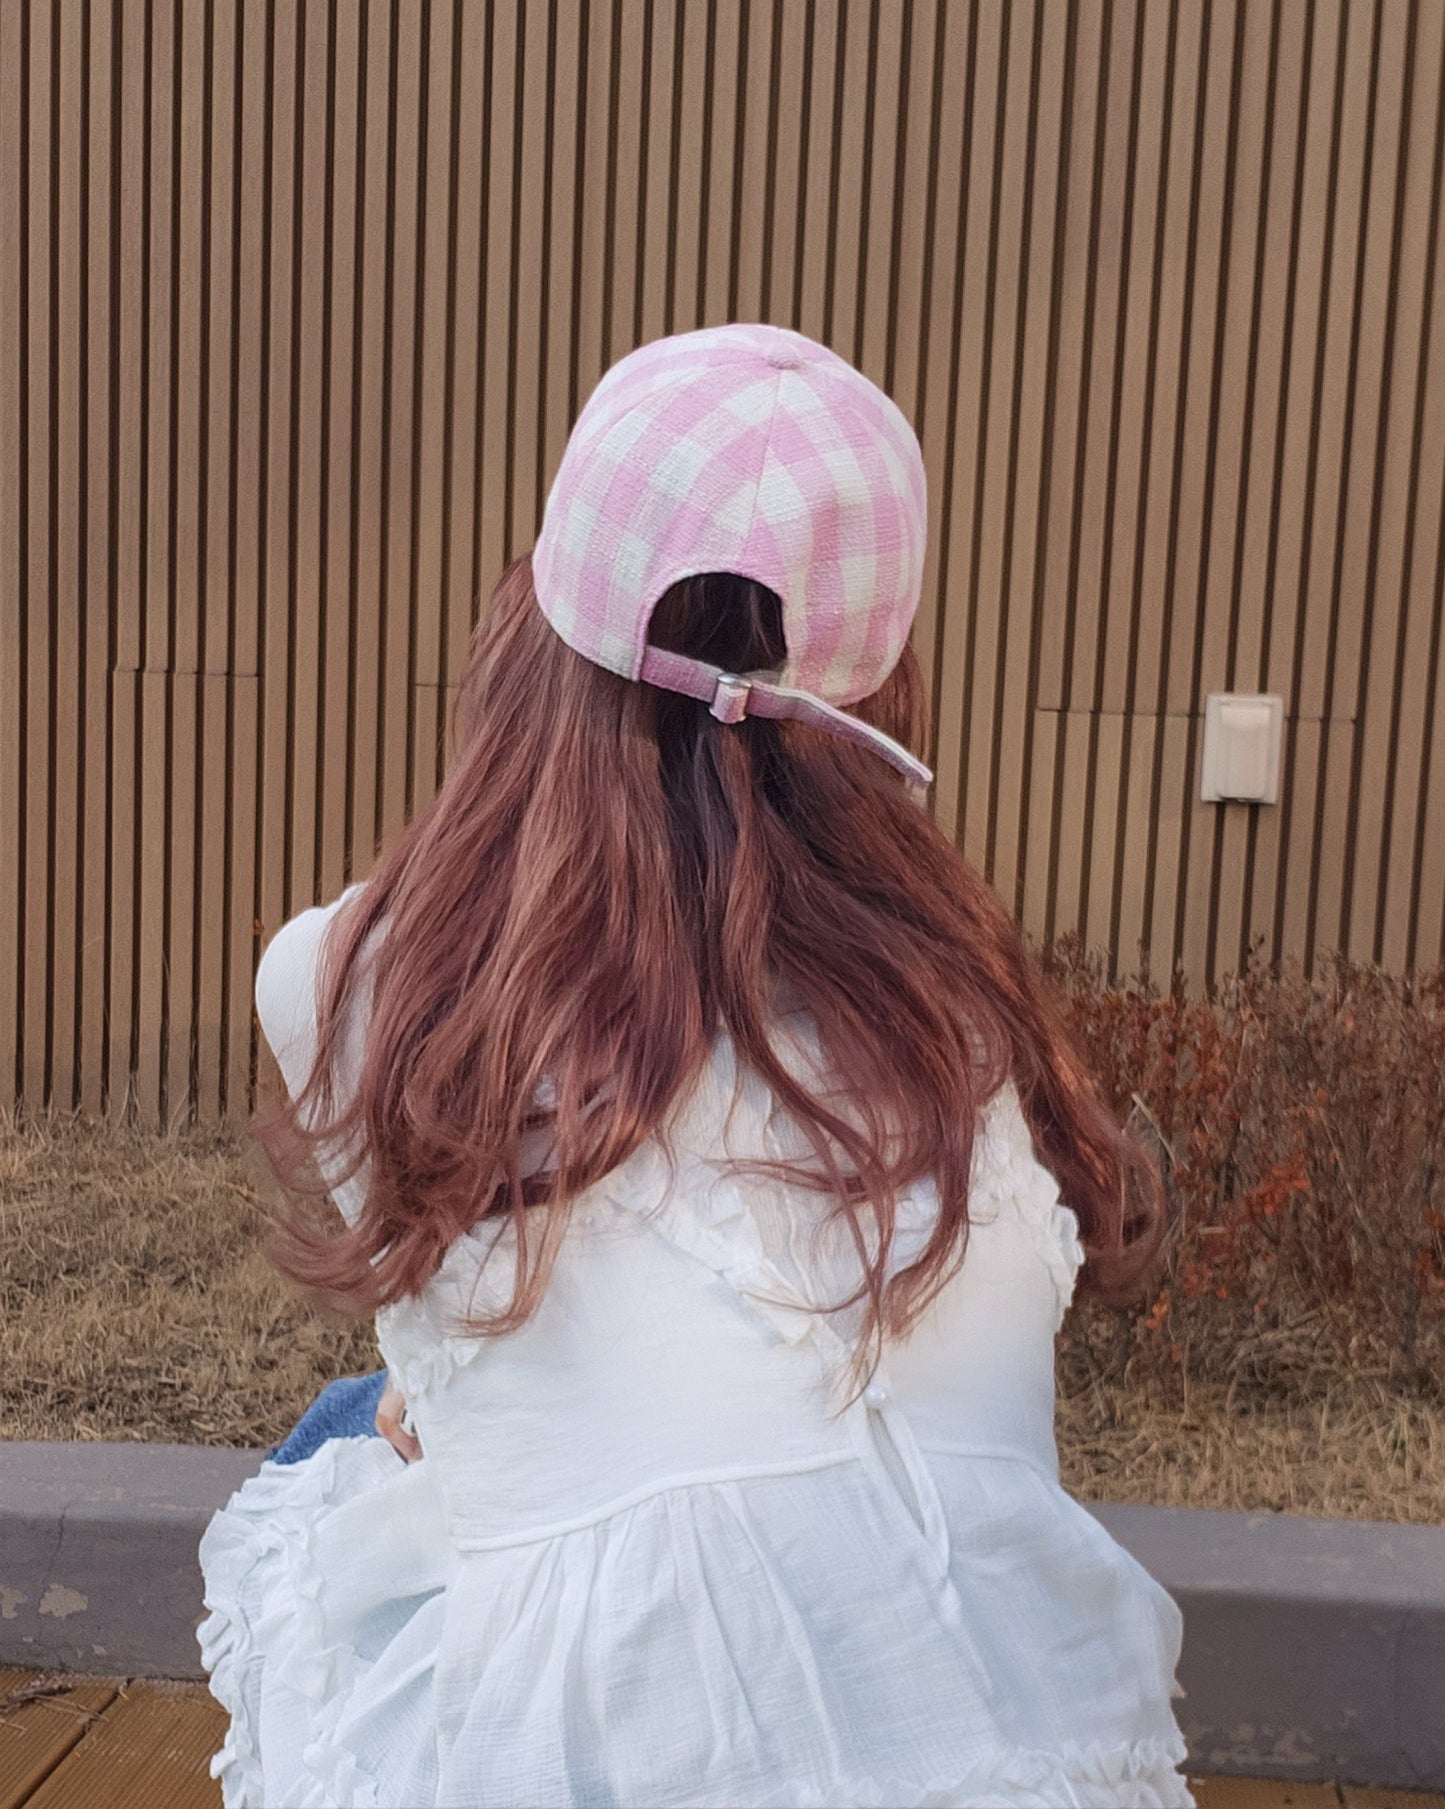 gingham check ribbon embroidery cap